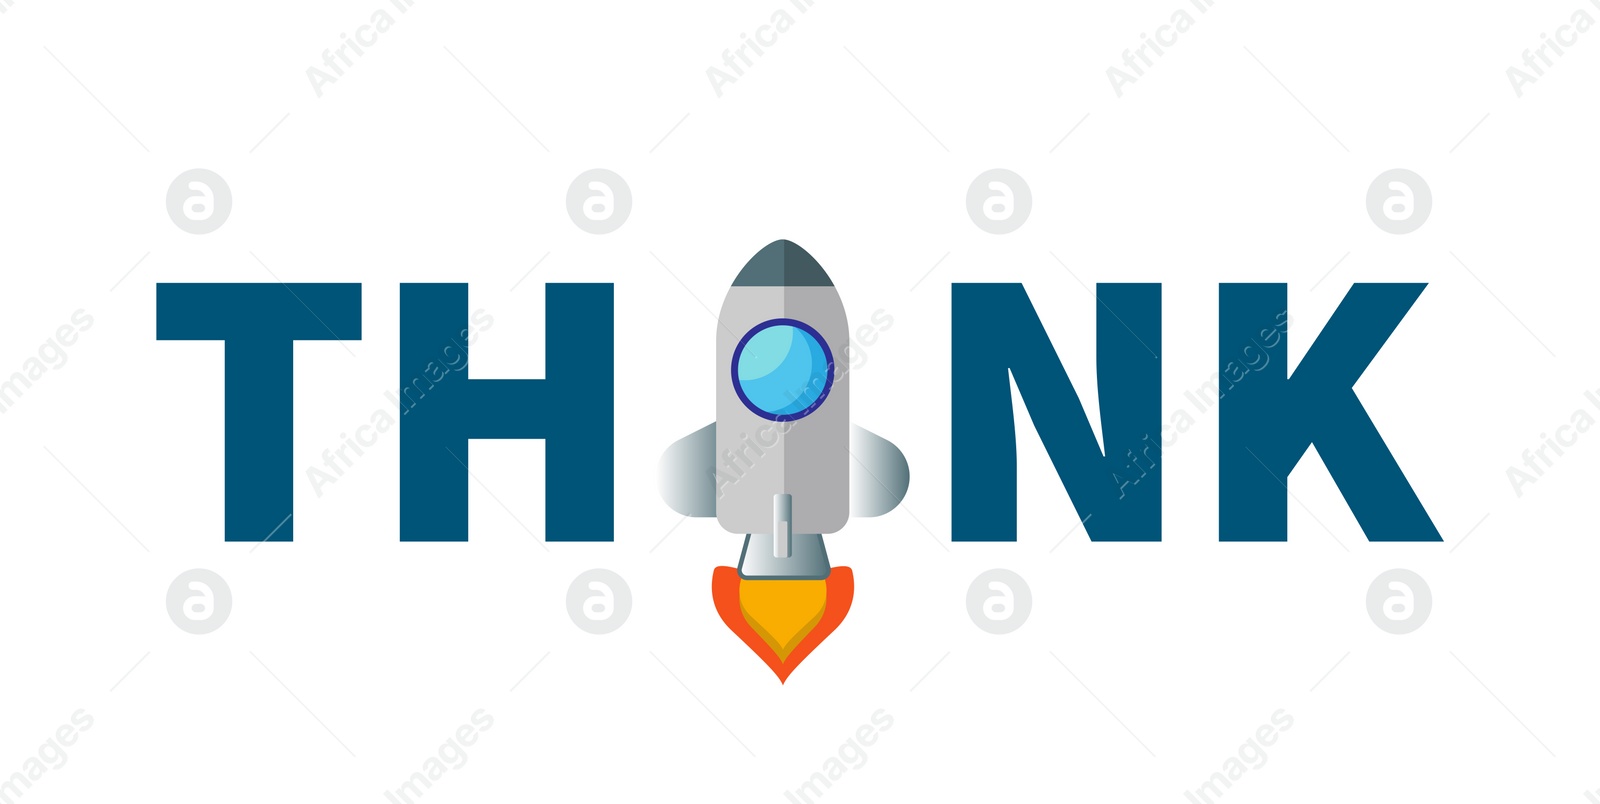 Illustration of Word Think with illustration of rocket instead of letter I on white background